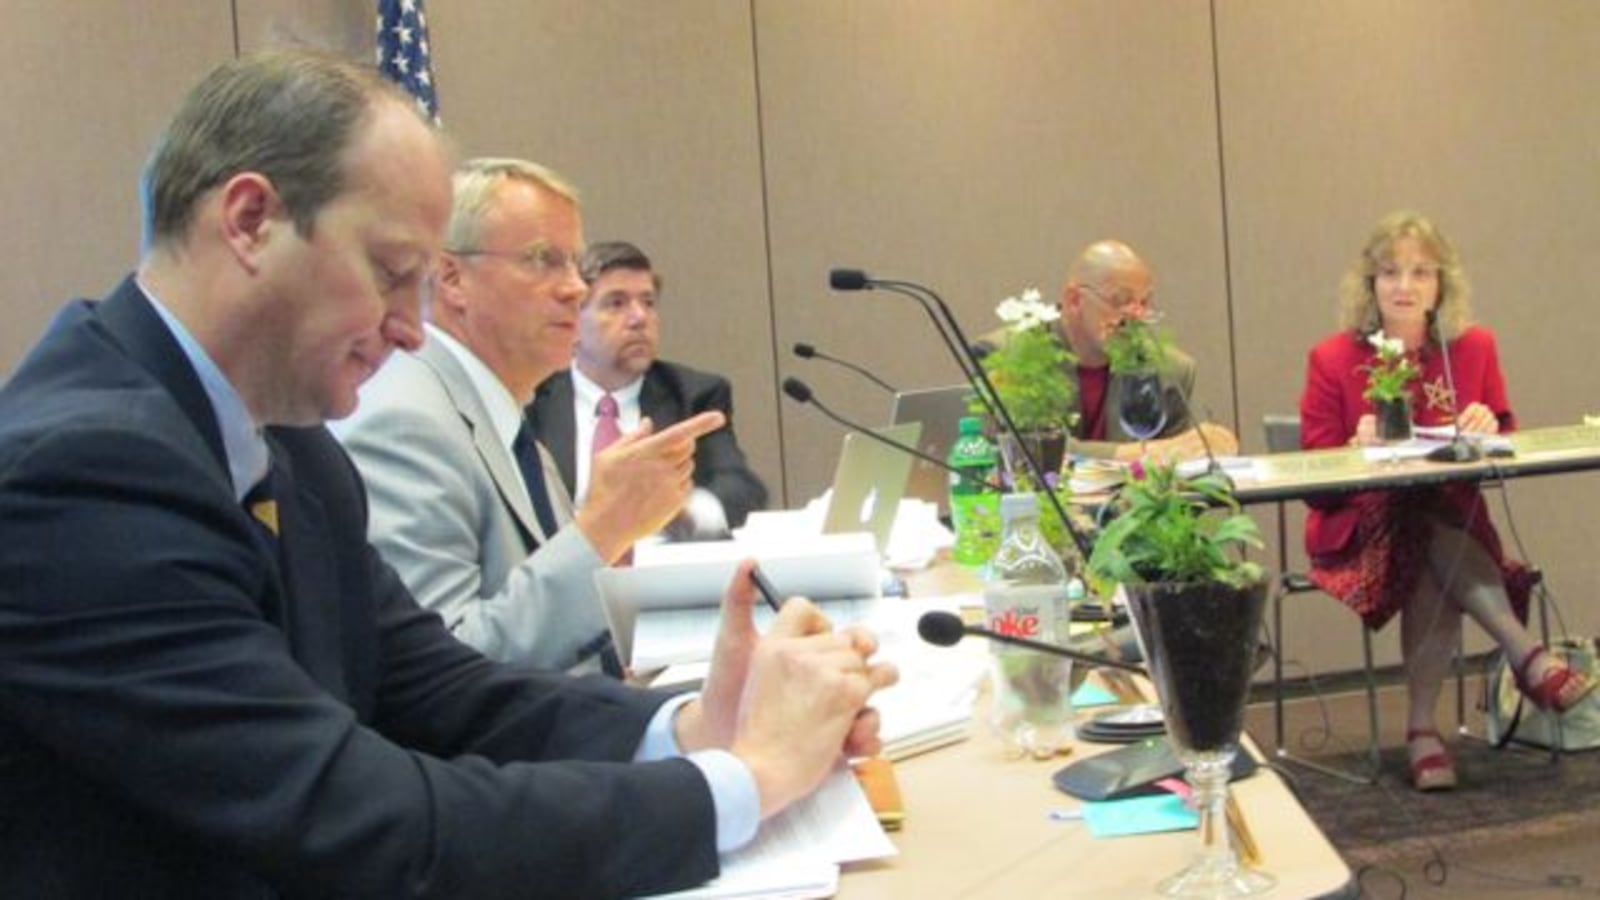 Gordon Henry (left) listens while Dan Elsener (second from the left) speaks at a state board meeting earlier this year. Brad Oliver, Troy Albert and Glenda Ritz look on.